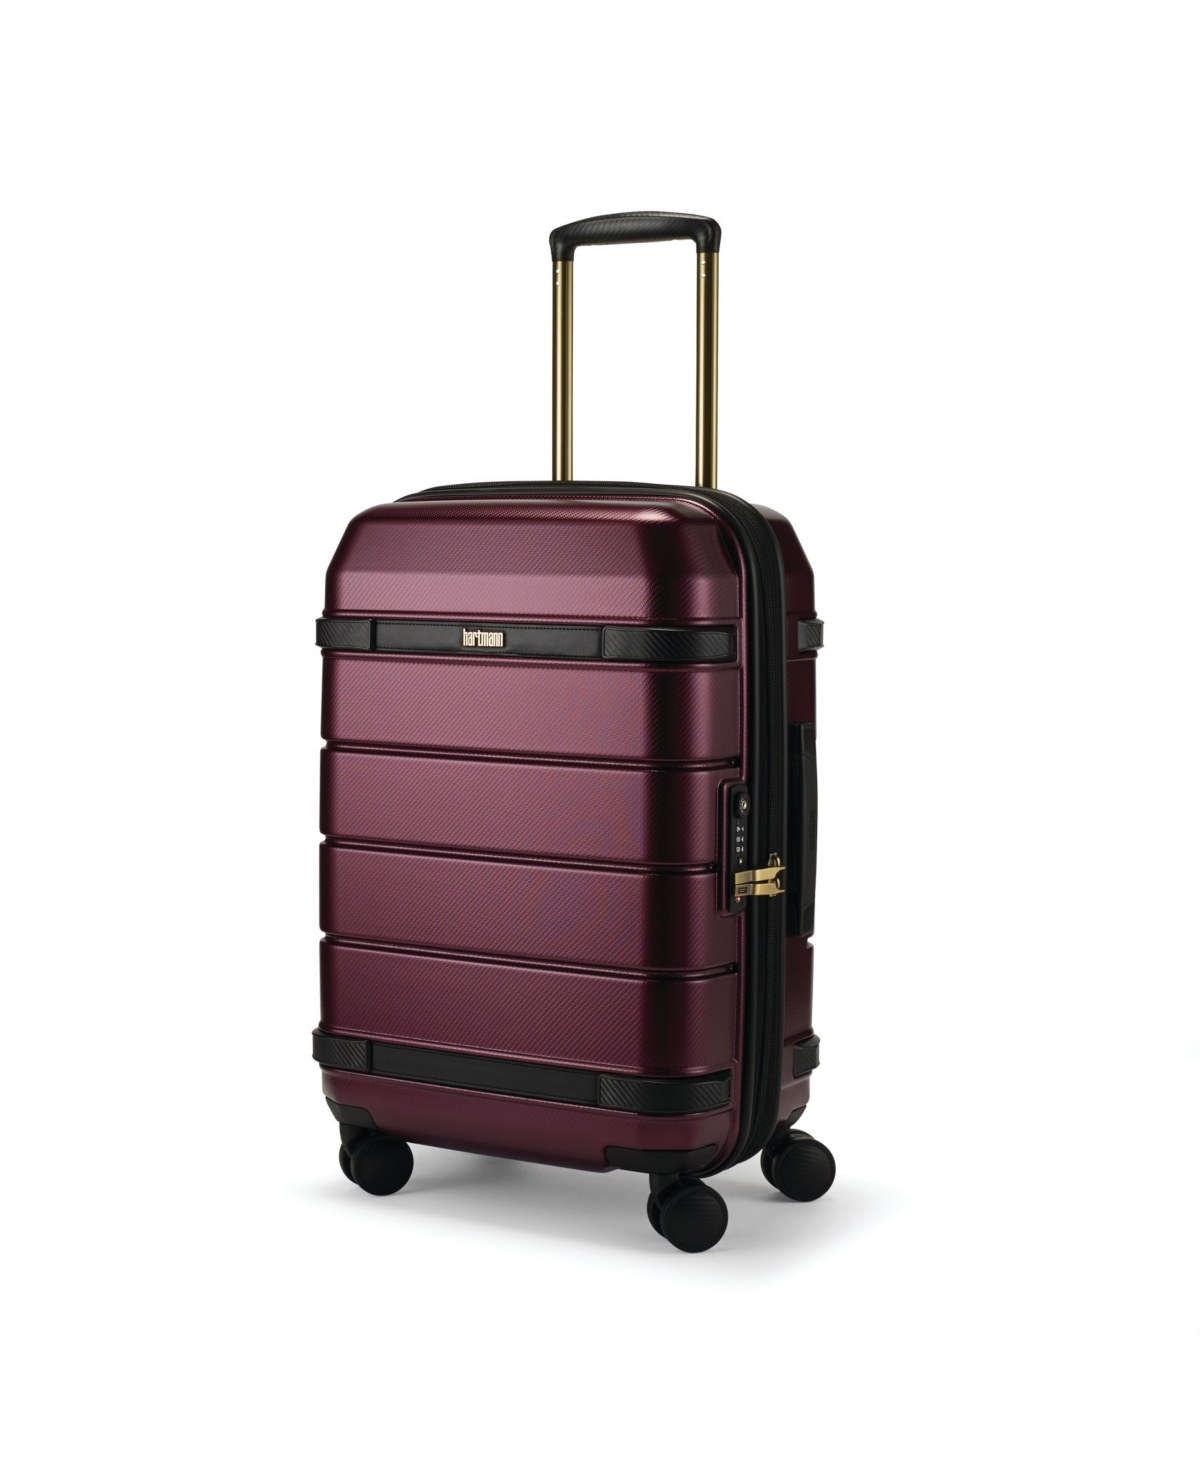 HARTMANN LUXE II 21" HARDSIDE CARRY-ON EXPANDABLE SPINNER